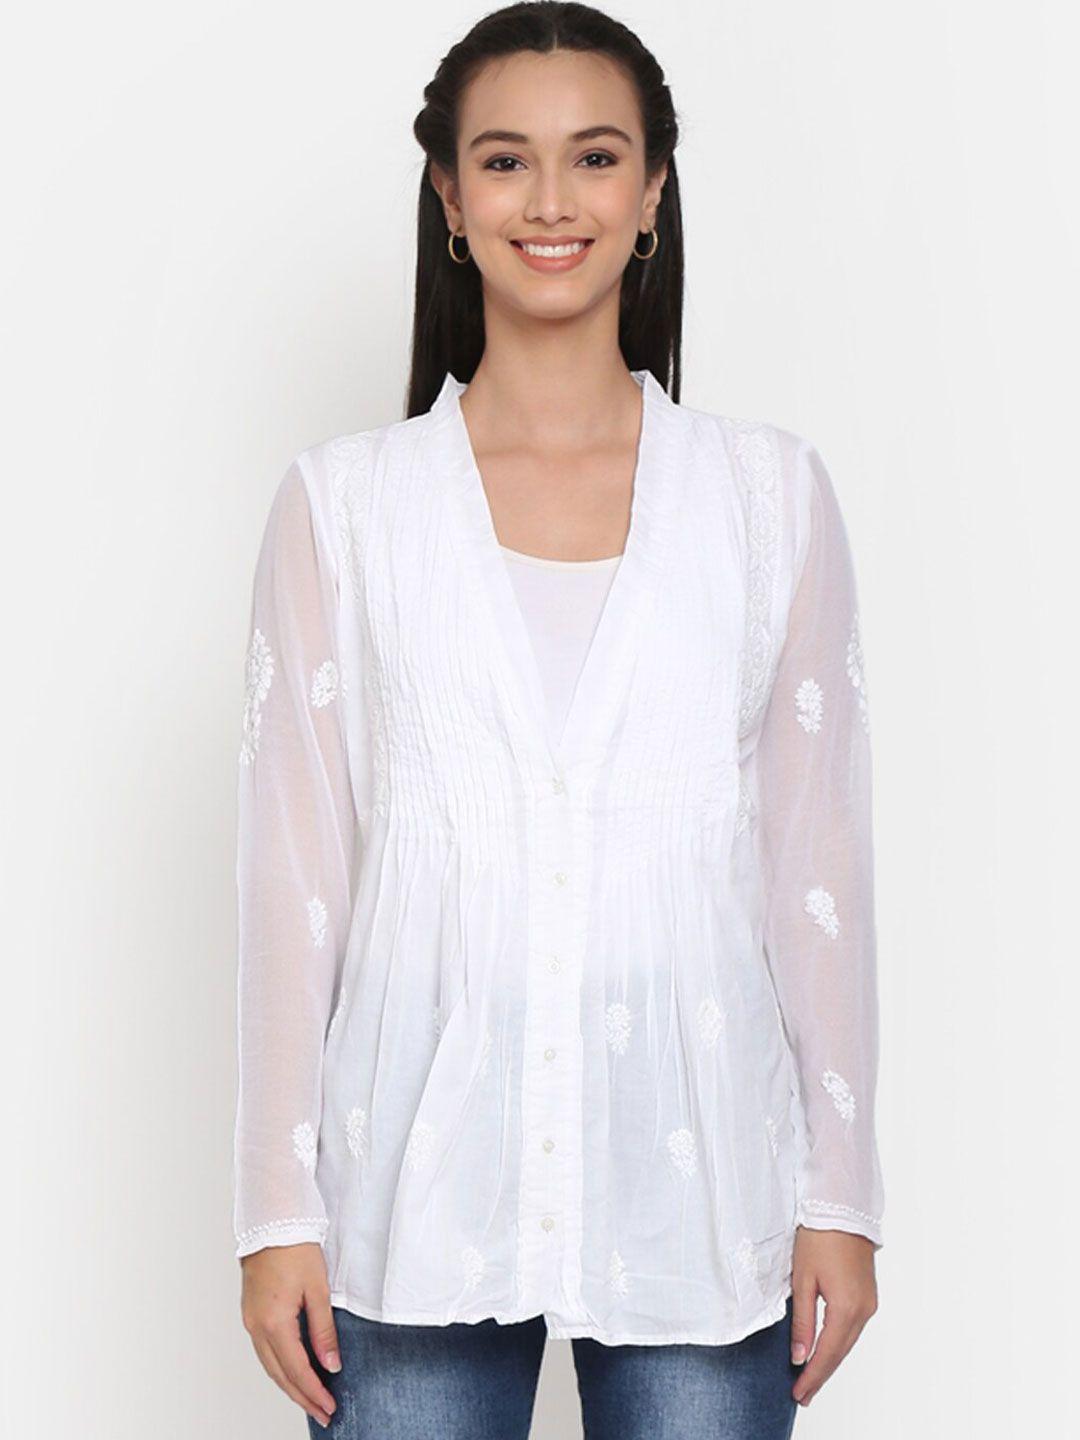 paramount chikan white floral embroidered cotton sustainable top